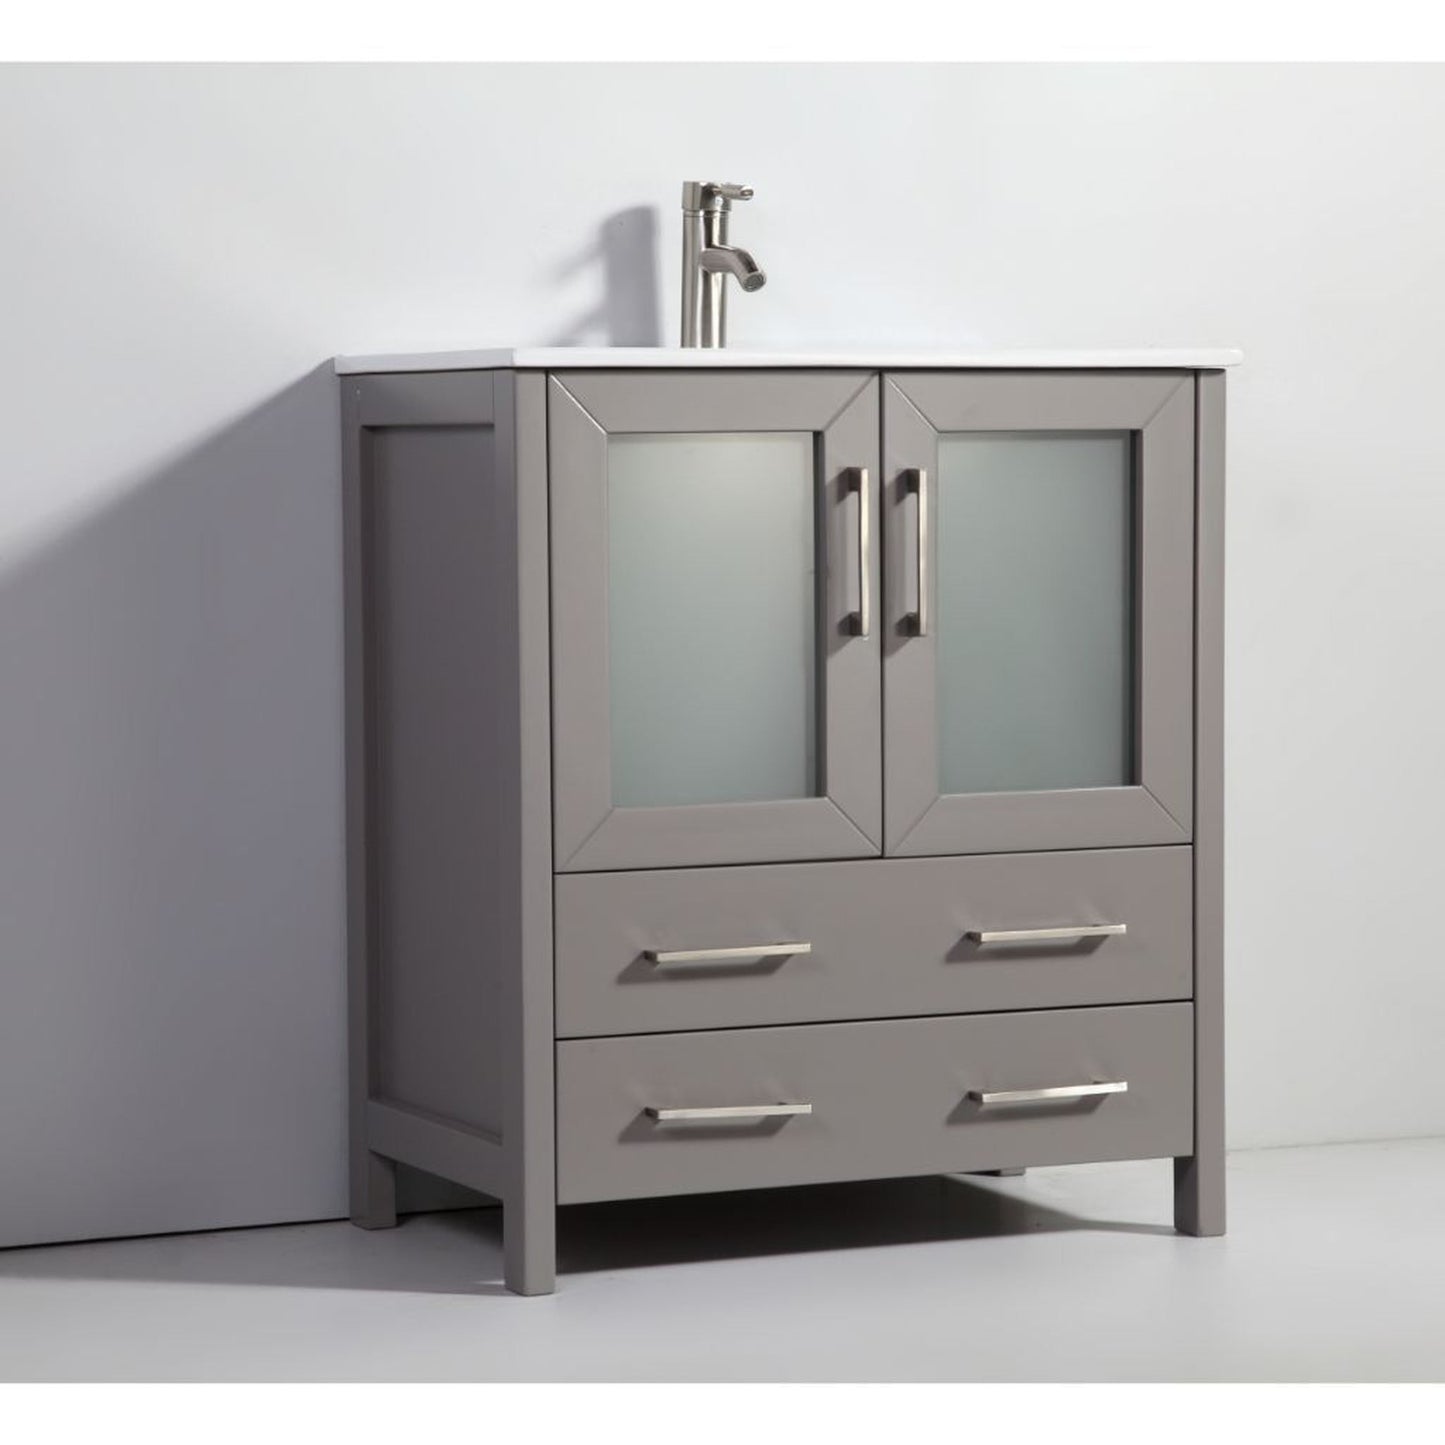 Vanity Art VA30 84" Double Gray Freestanding Modern Bathroom Vanity Set With Integrated Ceramic Sink, Compact 2 Shelves, 10 Dovetail Drawers Cabinet And 2 Mirrors